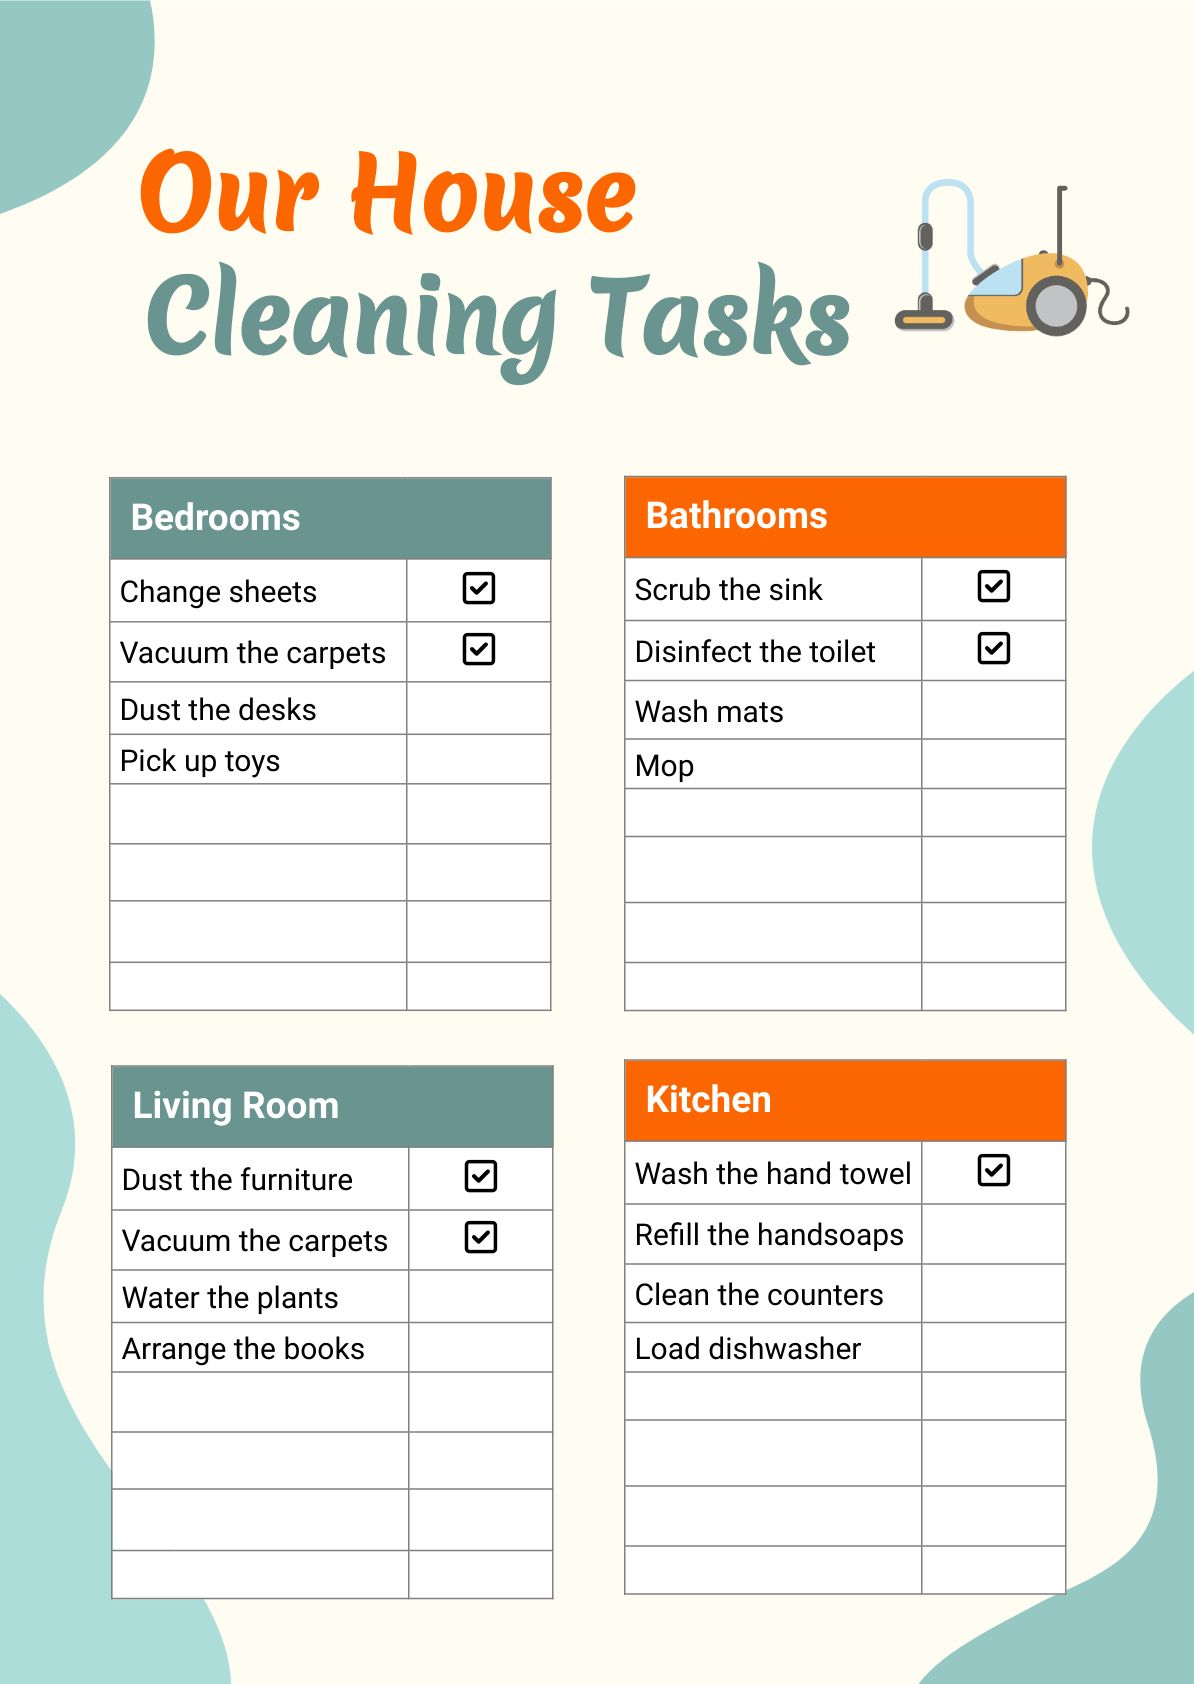 Home Cleaning Chart in PDF, Illustrator